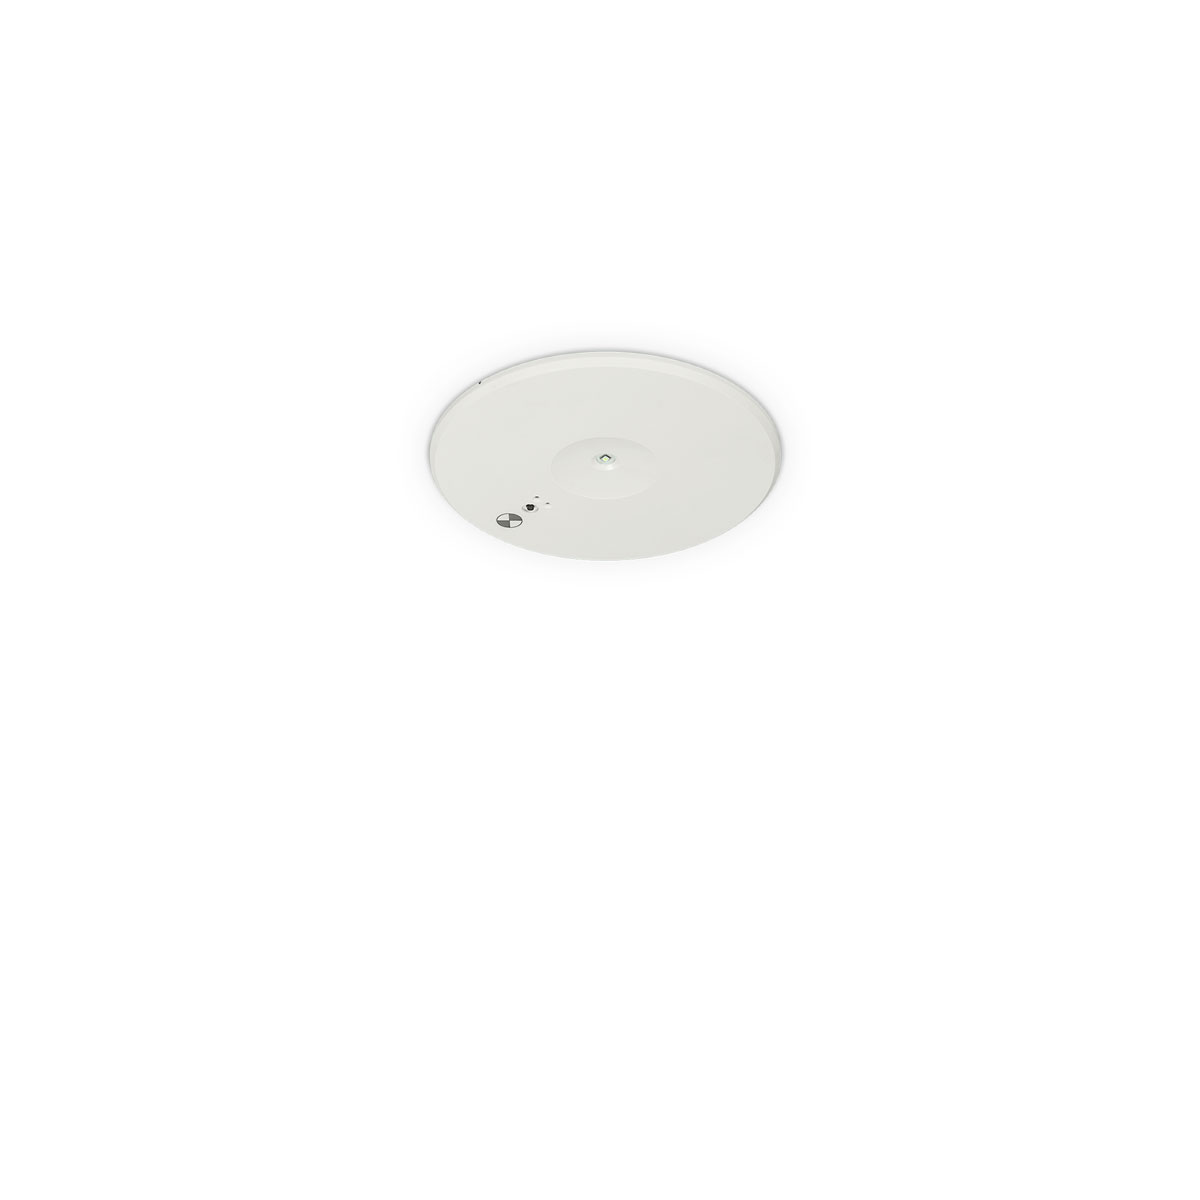 FIREFLY 2 WHITE RECESSED LITHIUM IRON PHOSPHATE